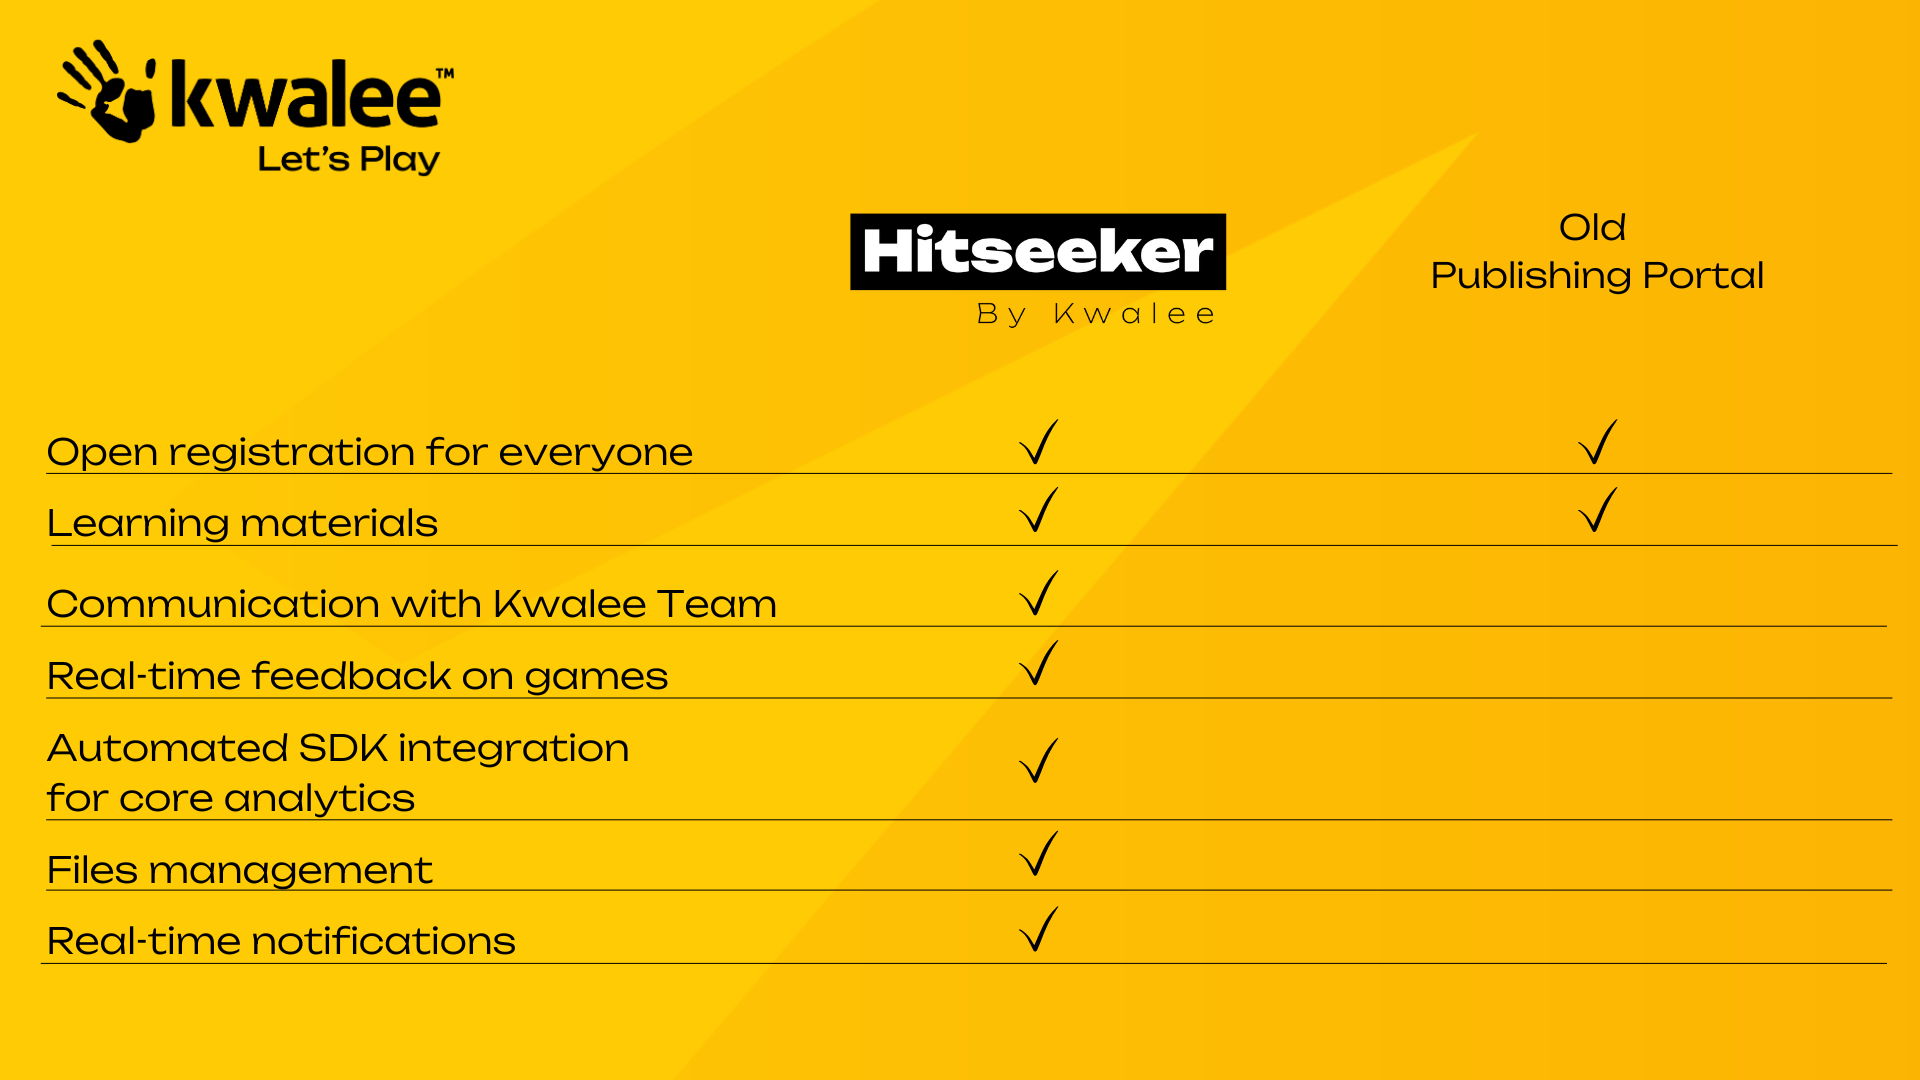 Comparison between Hitseeker and Kwalee’s previous Publishing Portal